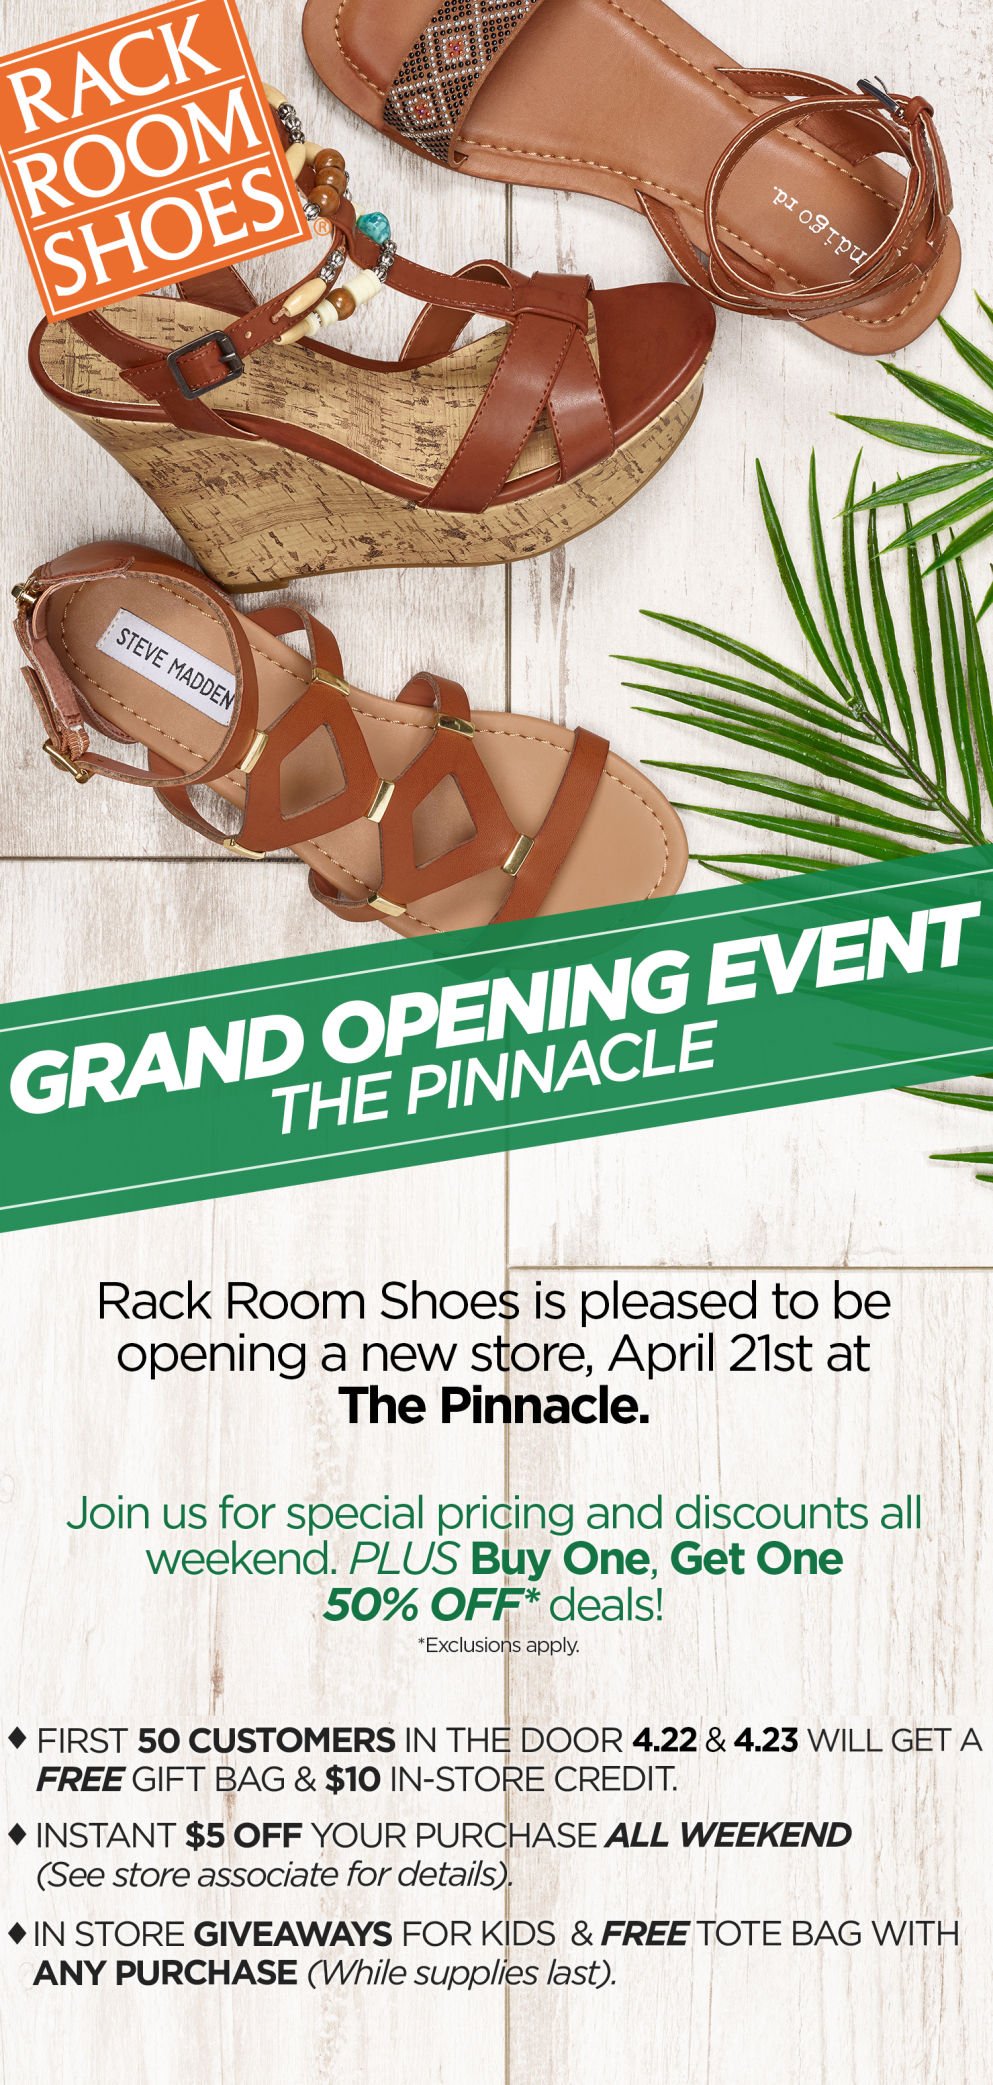 Rack Room Shoes To Open In The Pinnacle Archive